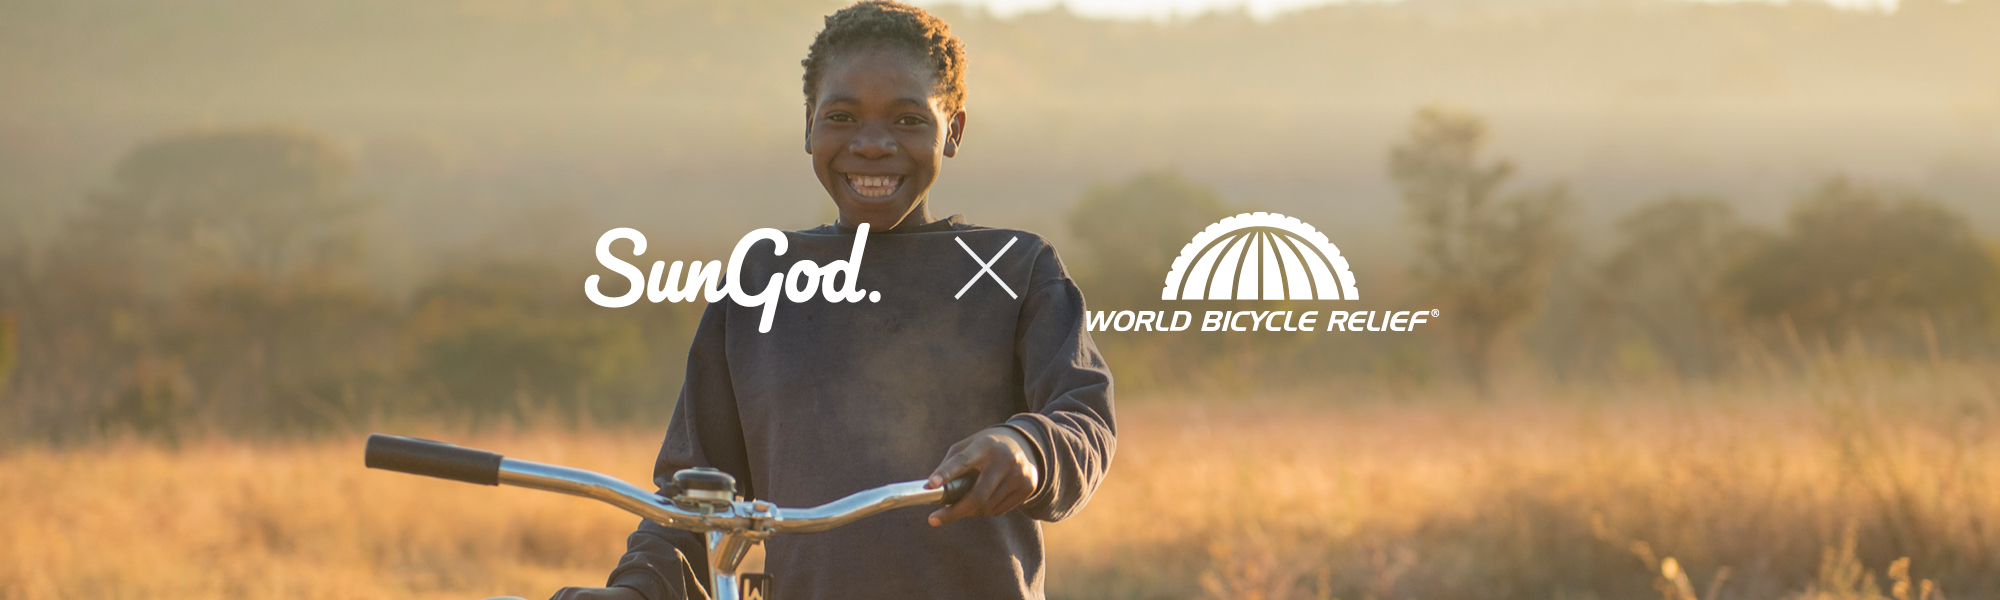 SunGod X World Bicycle Relief: Help Us to Change Lives